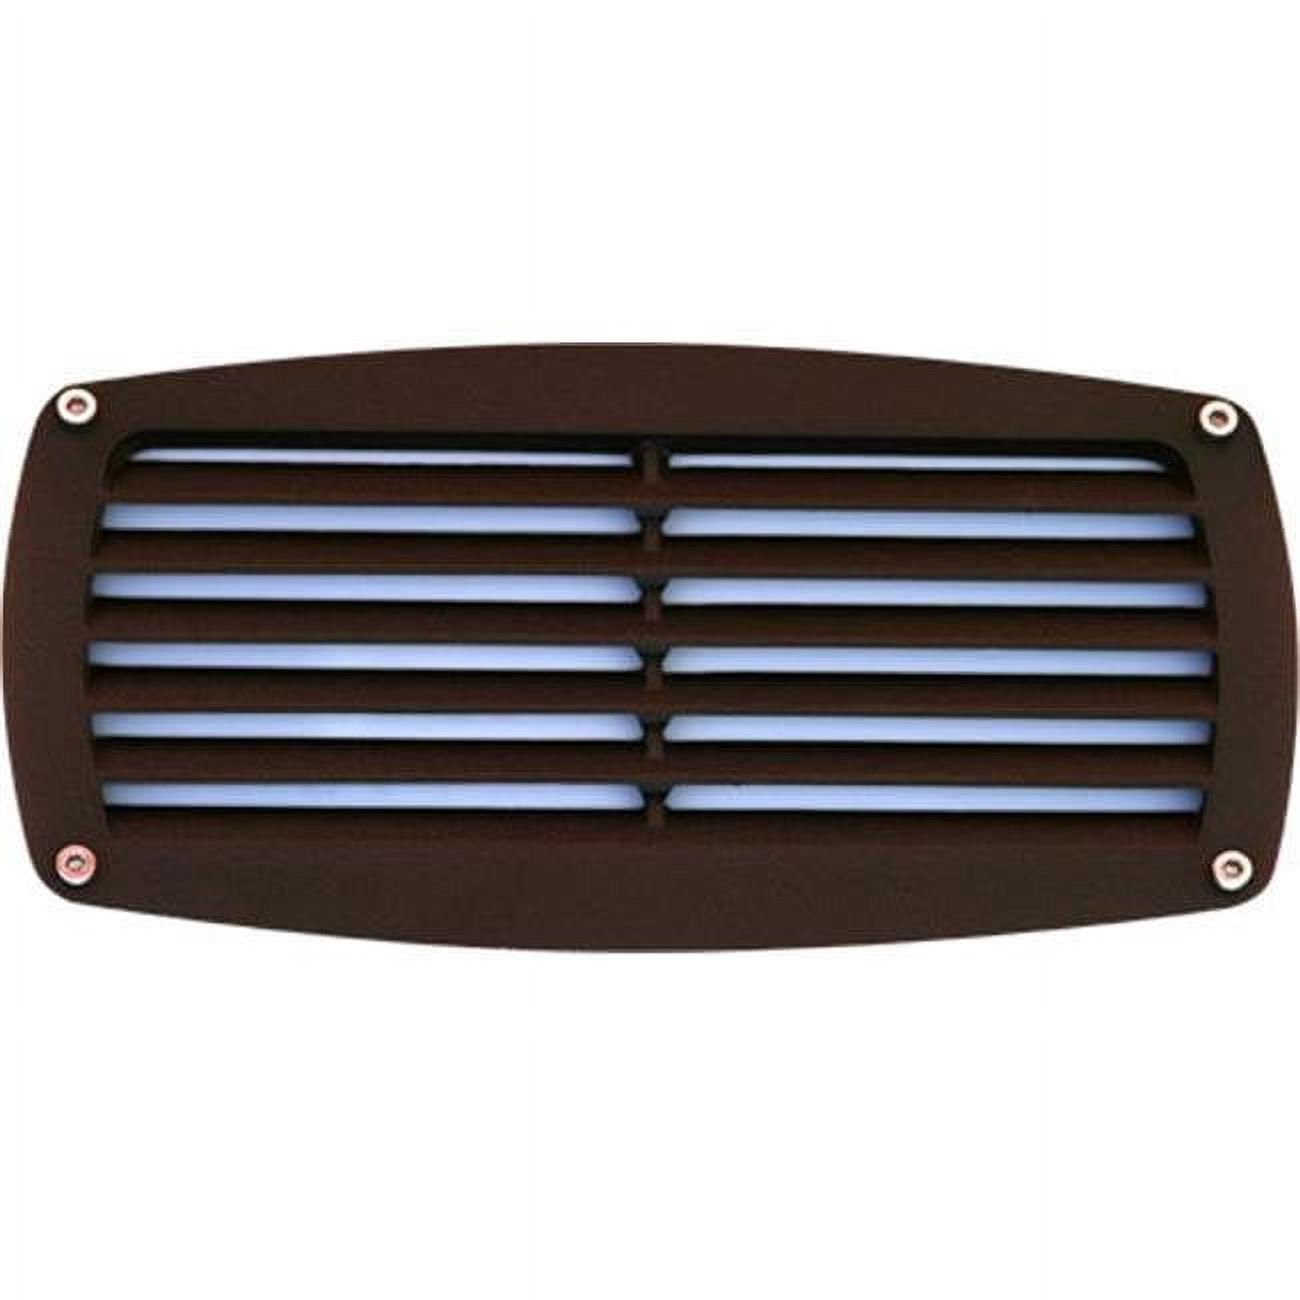 Dabmar Lighting DSL1017-BZ Recessed Louvered Brick, Step & Wall Light, Bronze - 4.85 x 8.95 x 3.80 in. - image 1 of 1